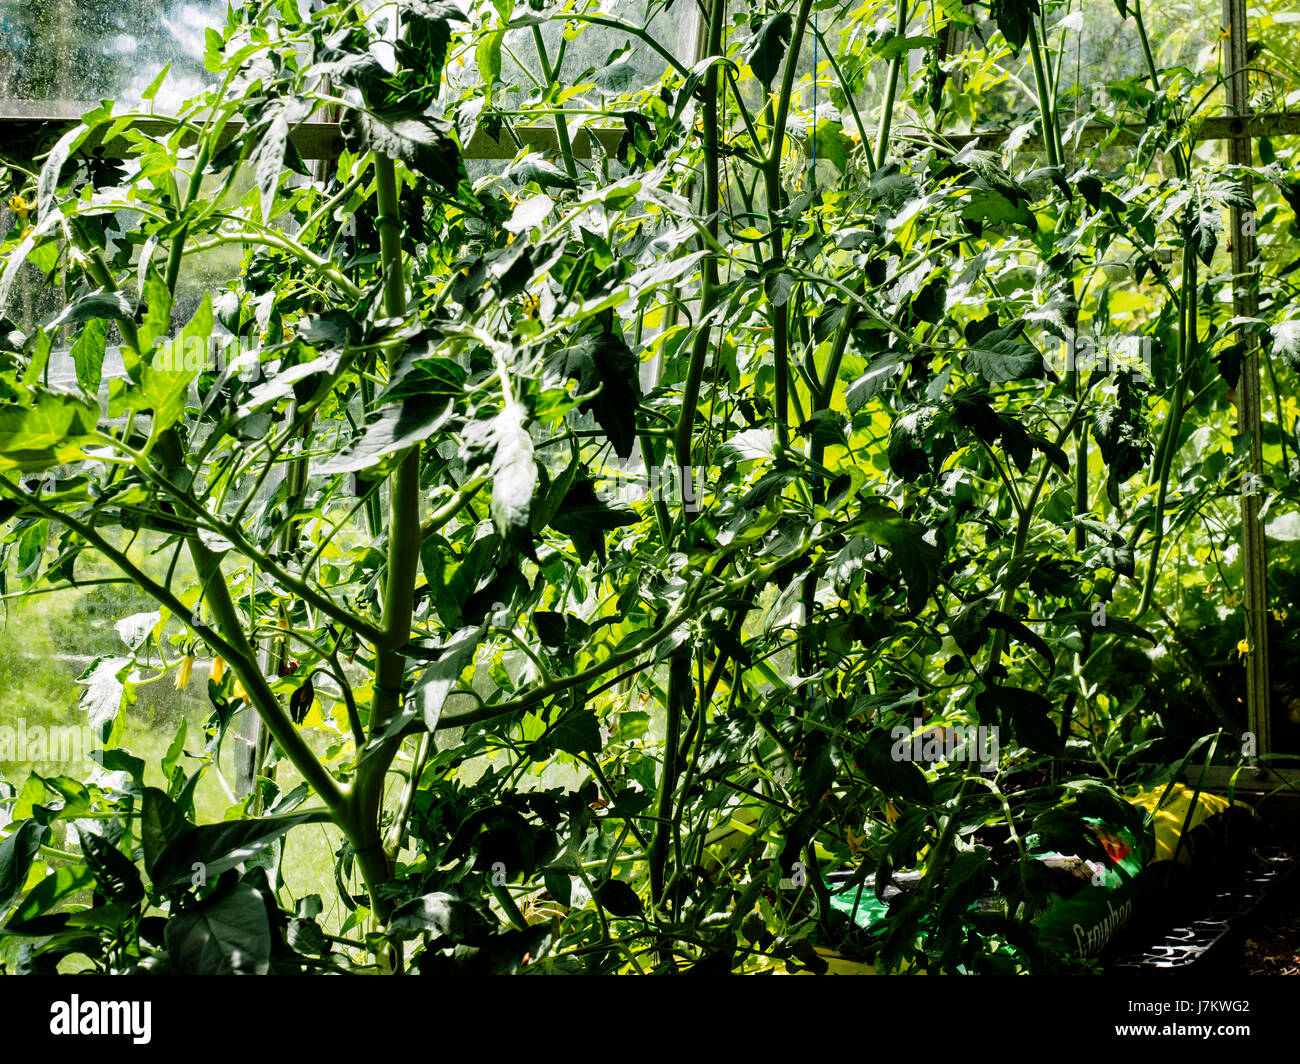 Tomatoes growing as bush plants in grow bags in the protective environment of a domestic greenhouse. Stock Photo